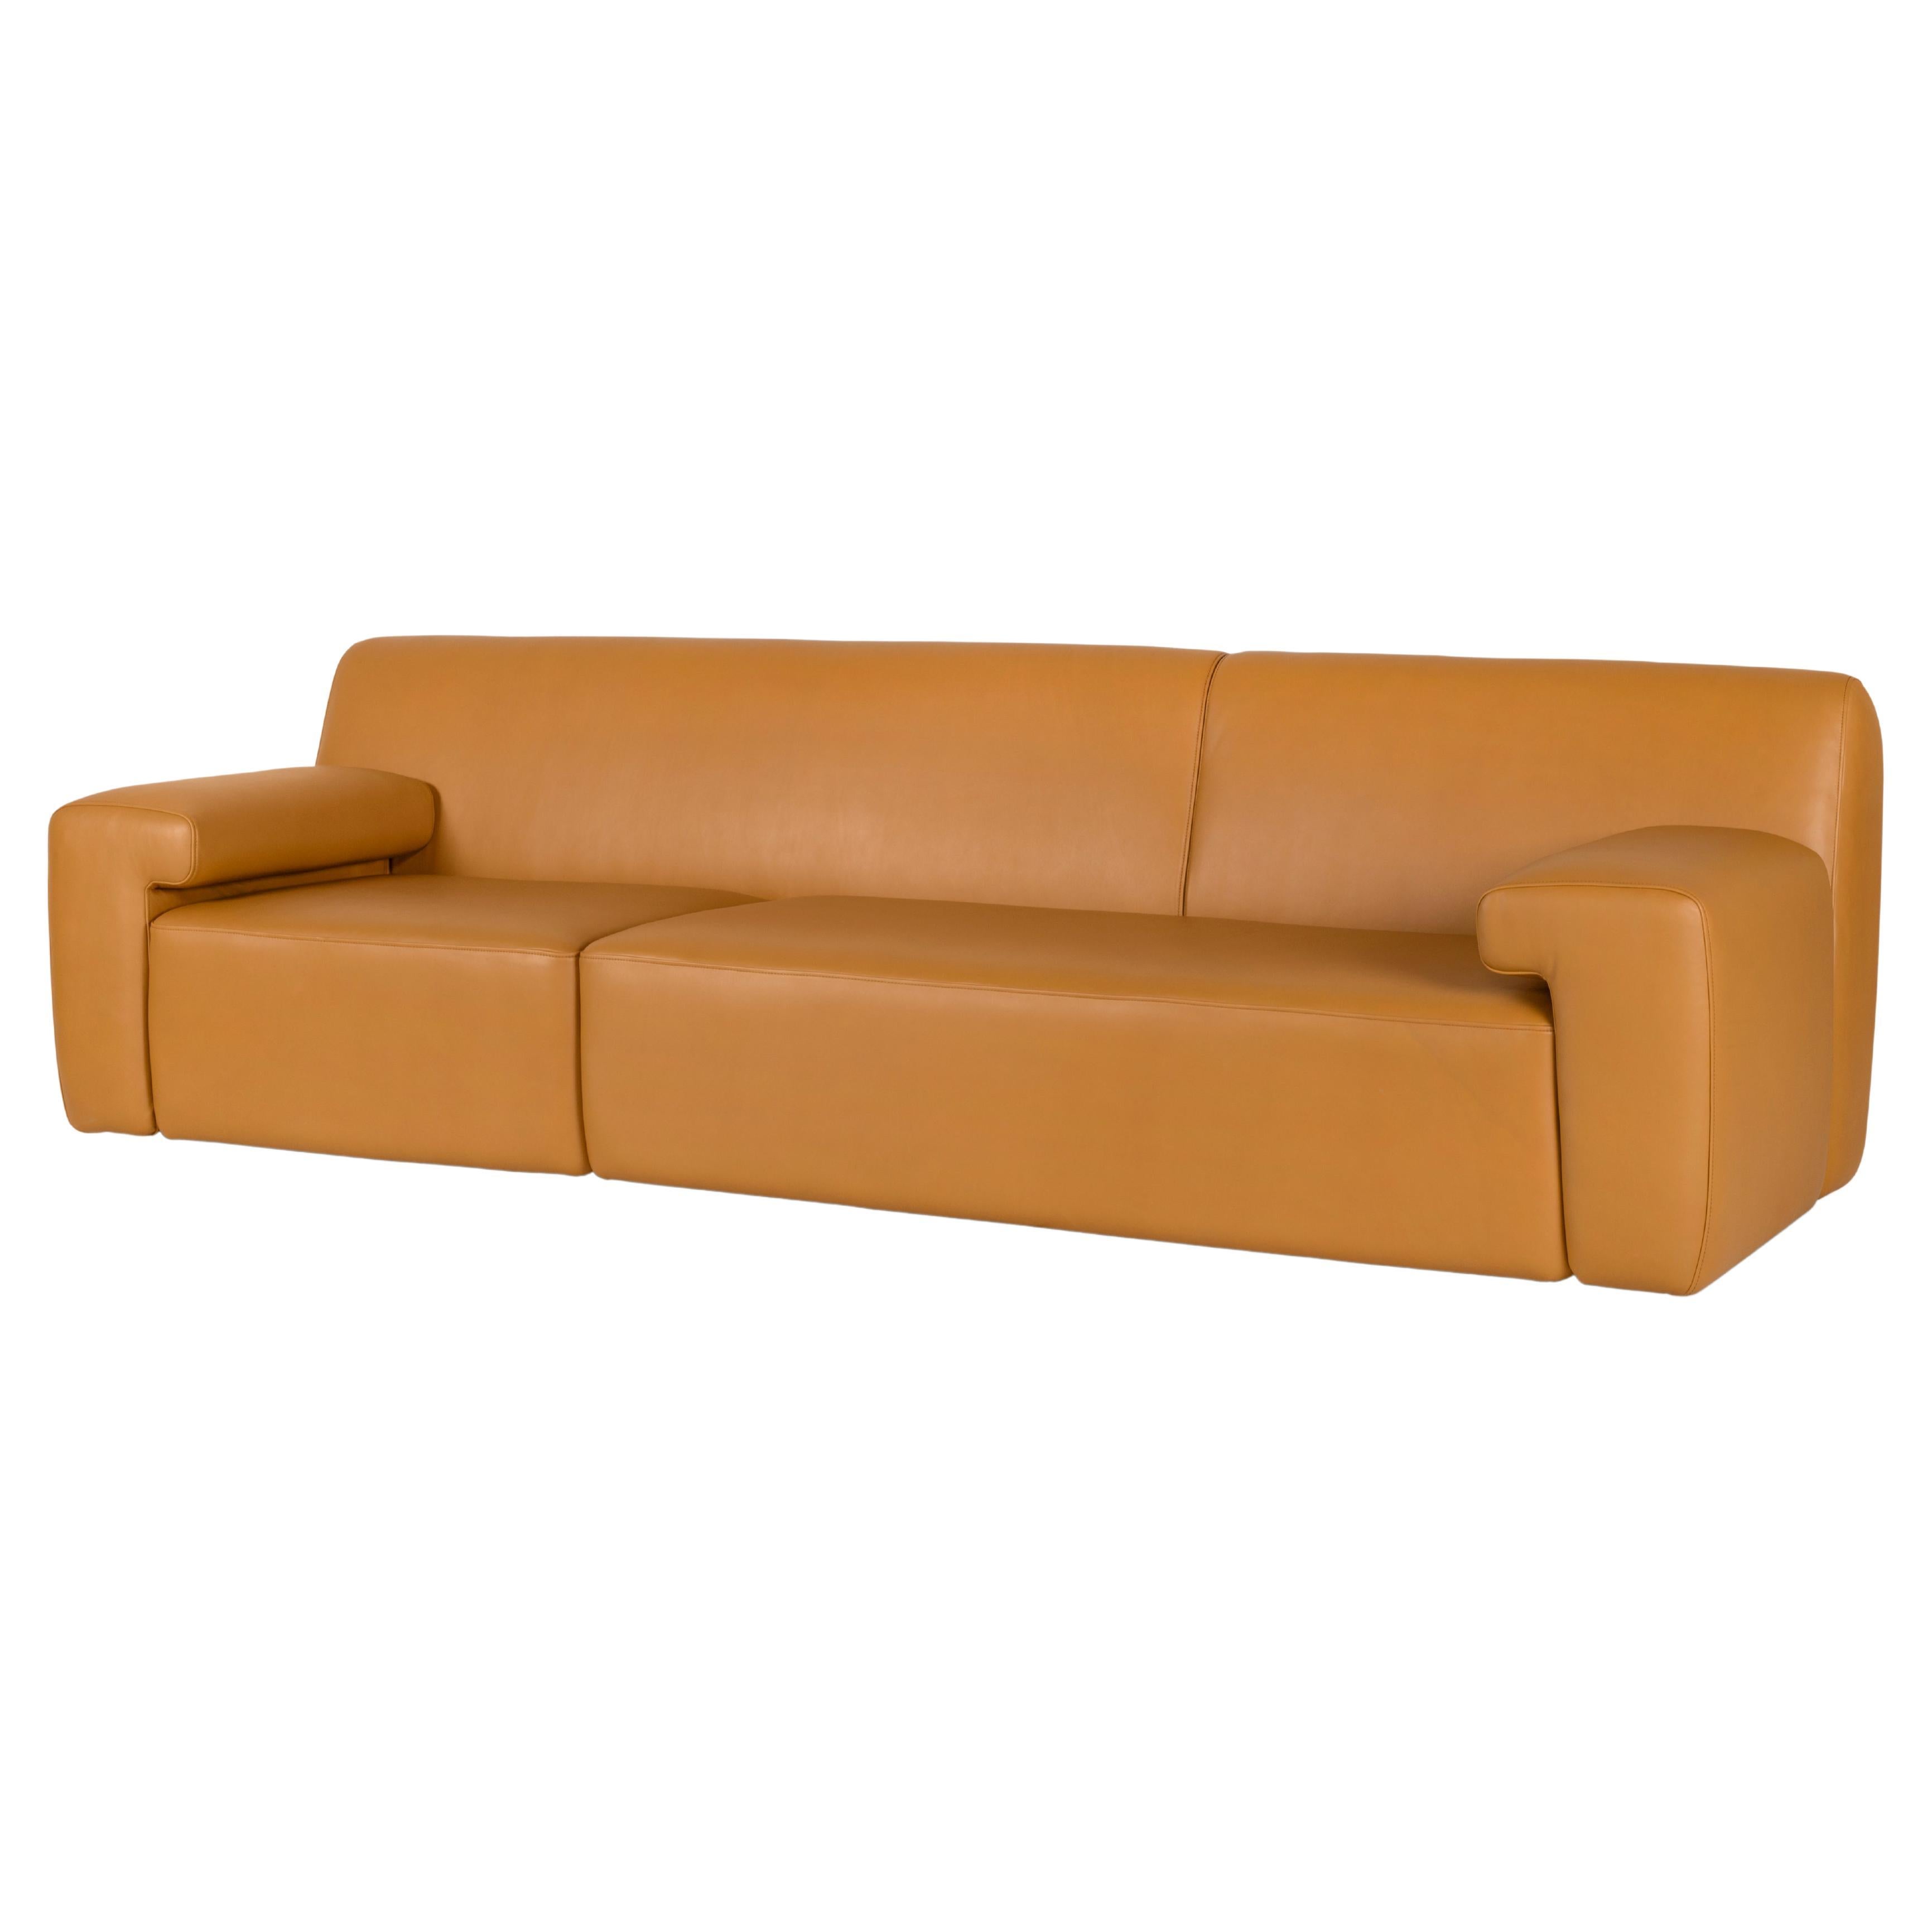 Contemporary Modern Almourol 4-Seat Sofa in Camel Leather by Greenapple